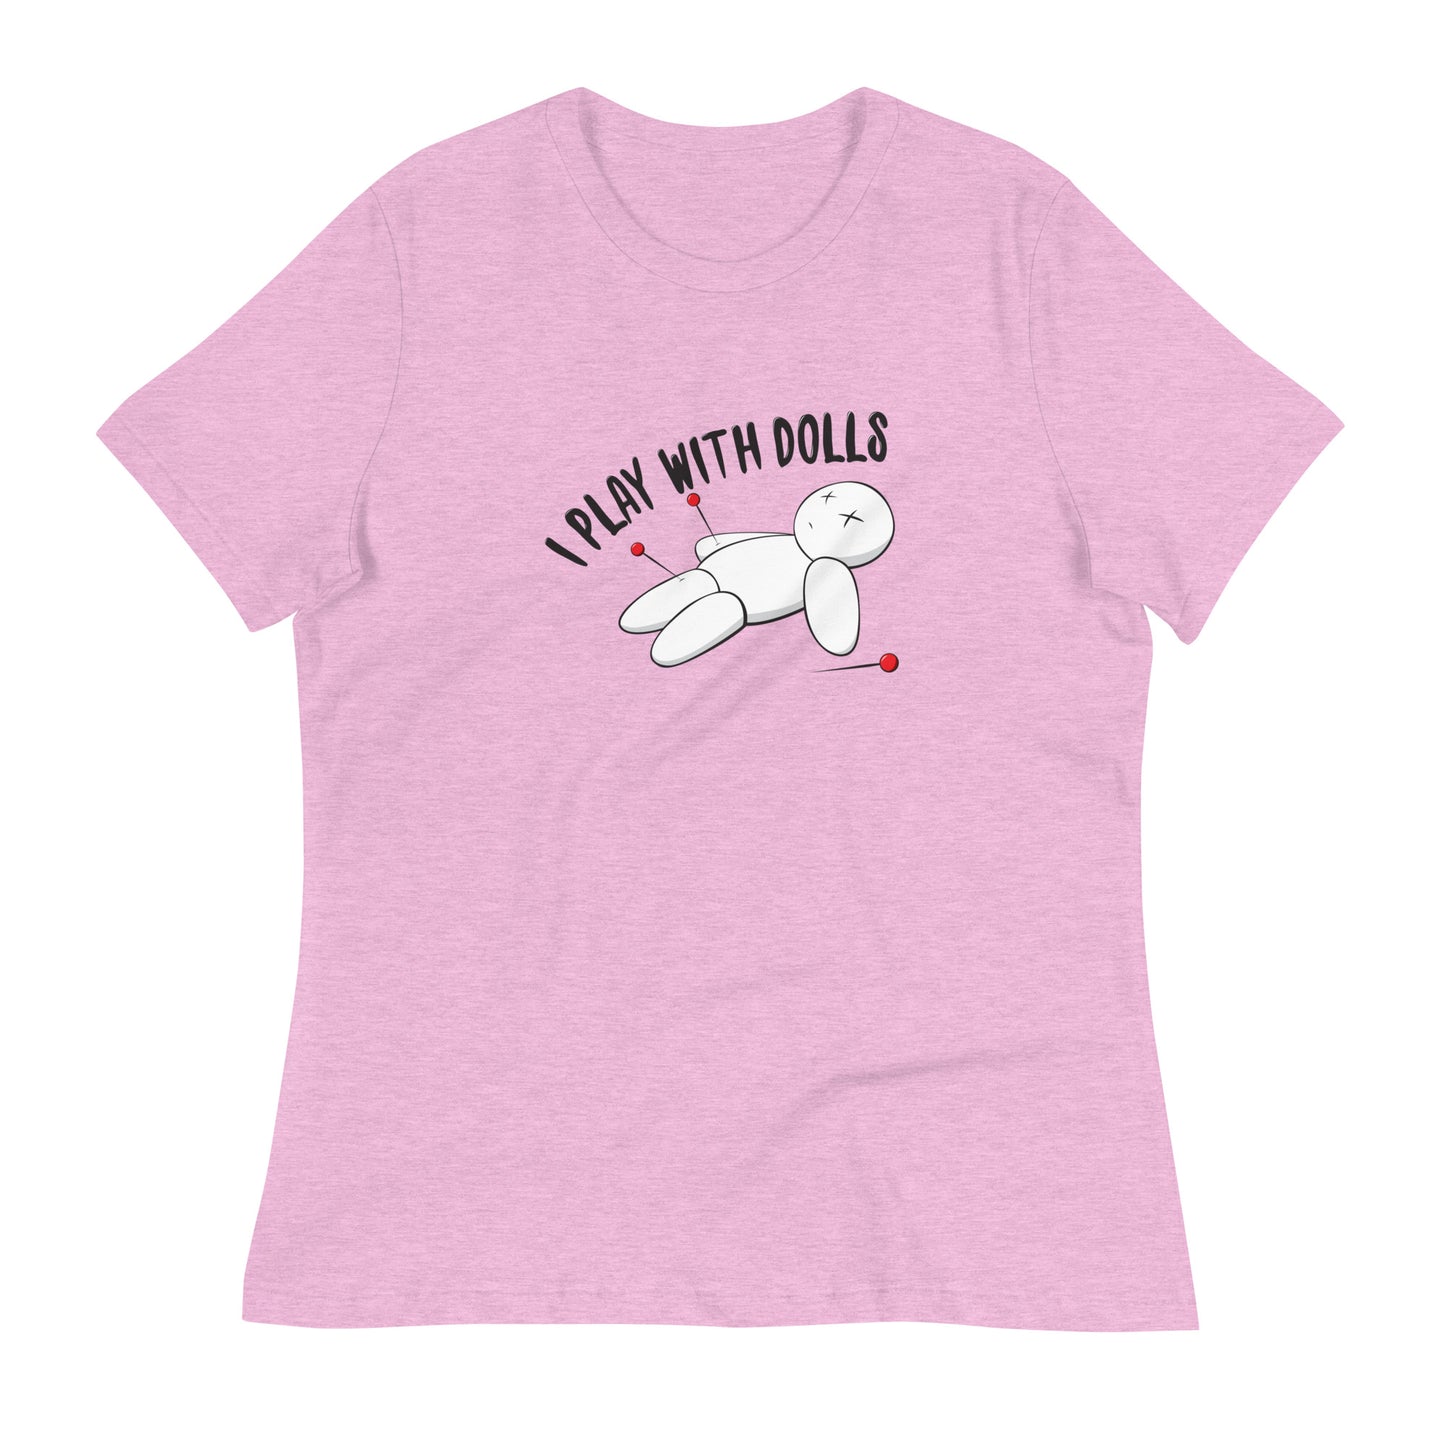 Heather Prism Lilac women's relaxed fit t-shirt with graphic of white voodoo doll with Xs for eyes stuck with several pins and text "I PLAY WITH DOLLS"